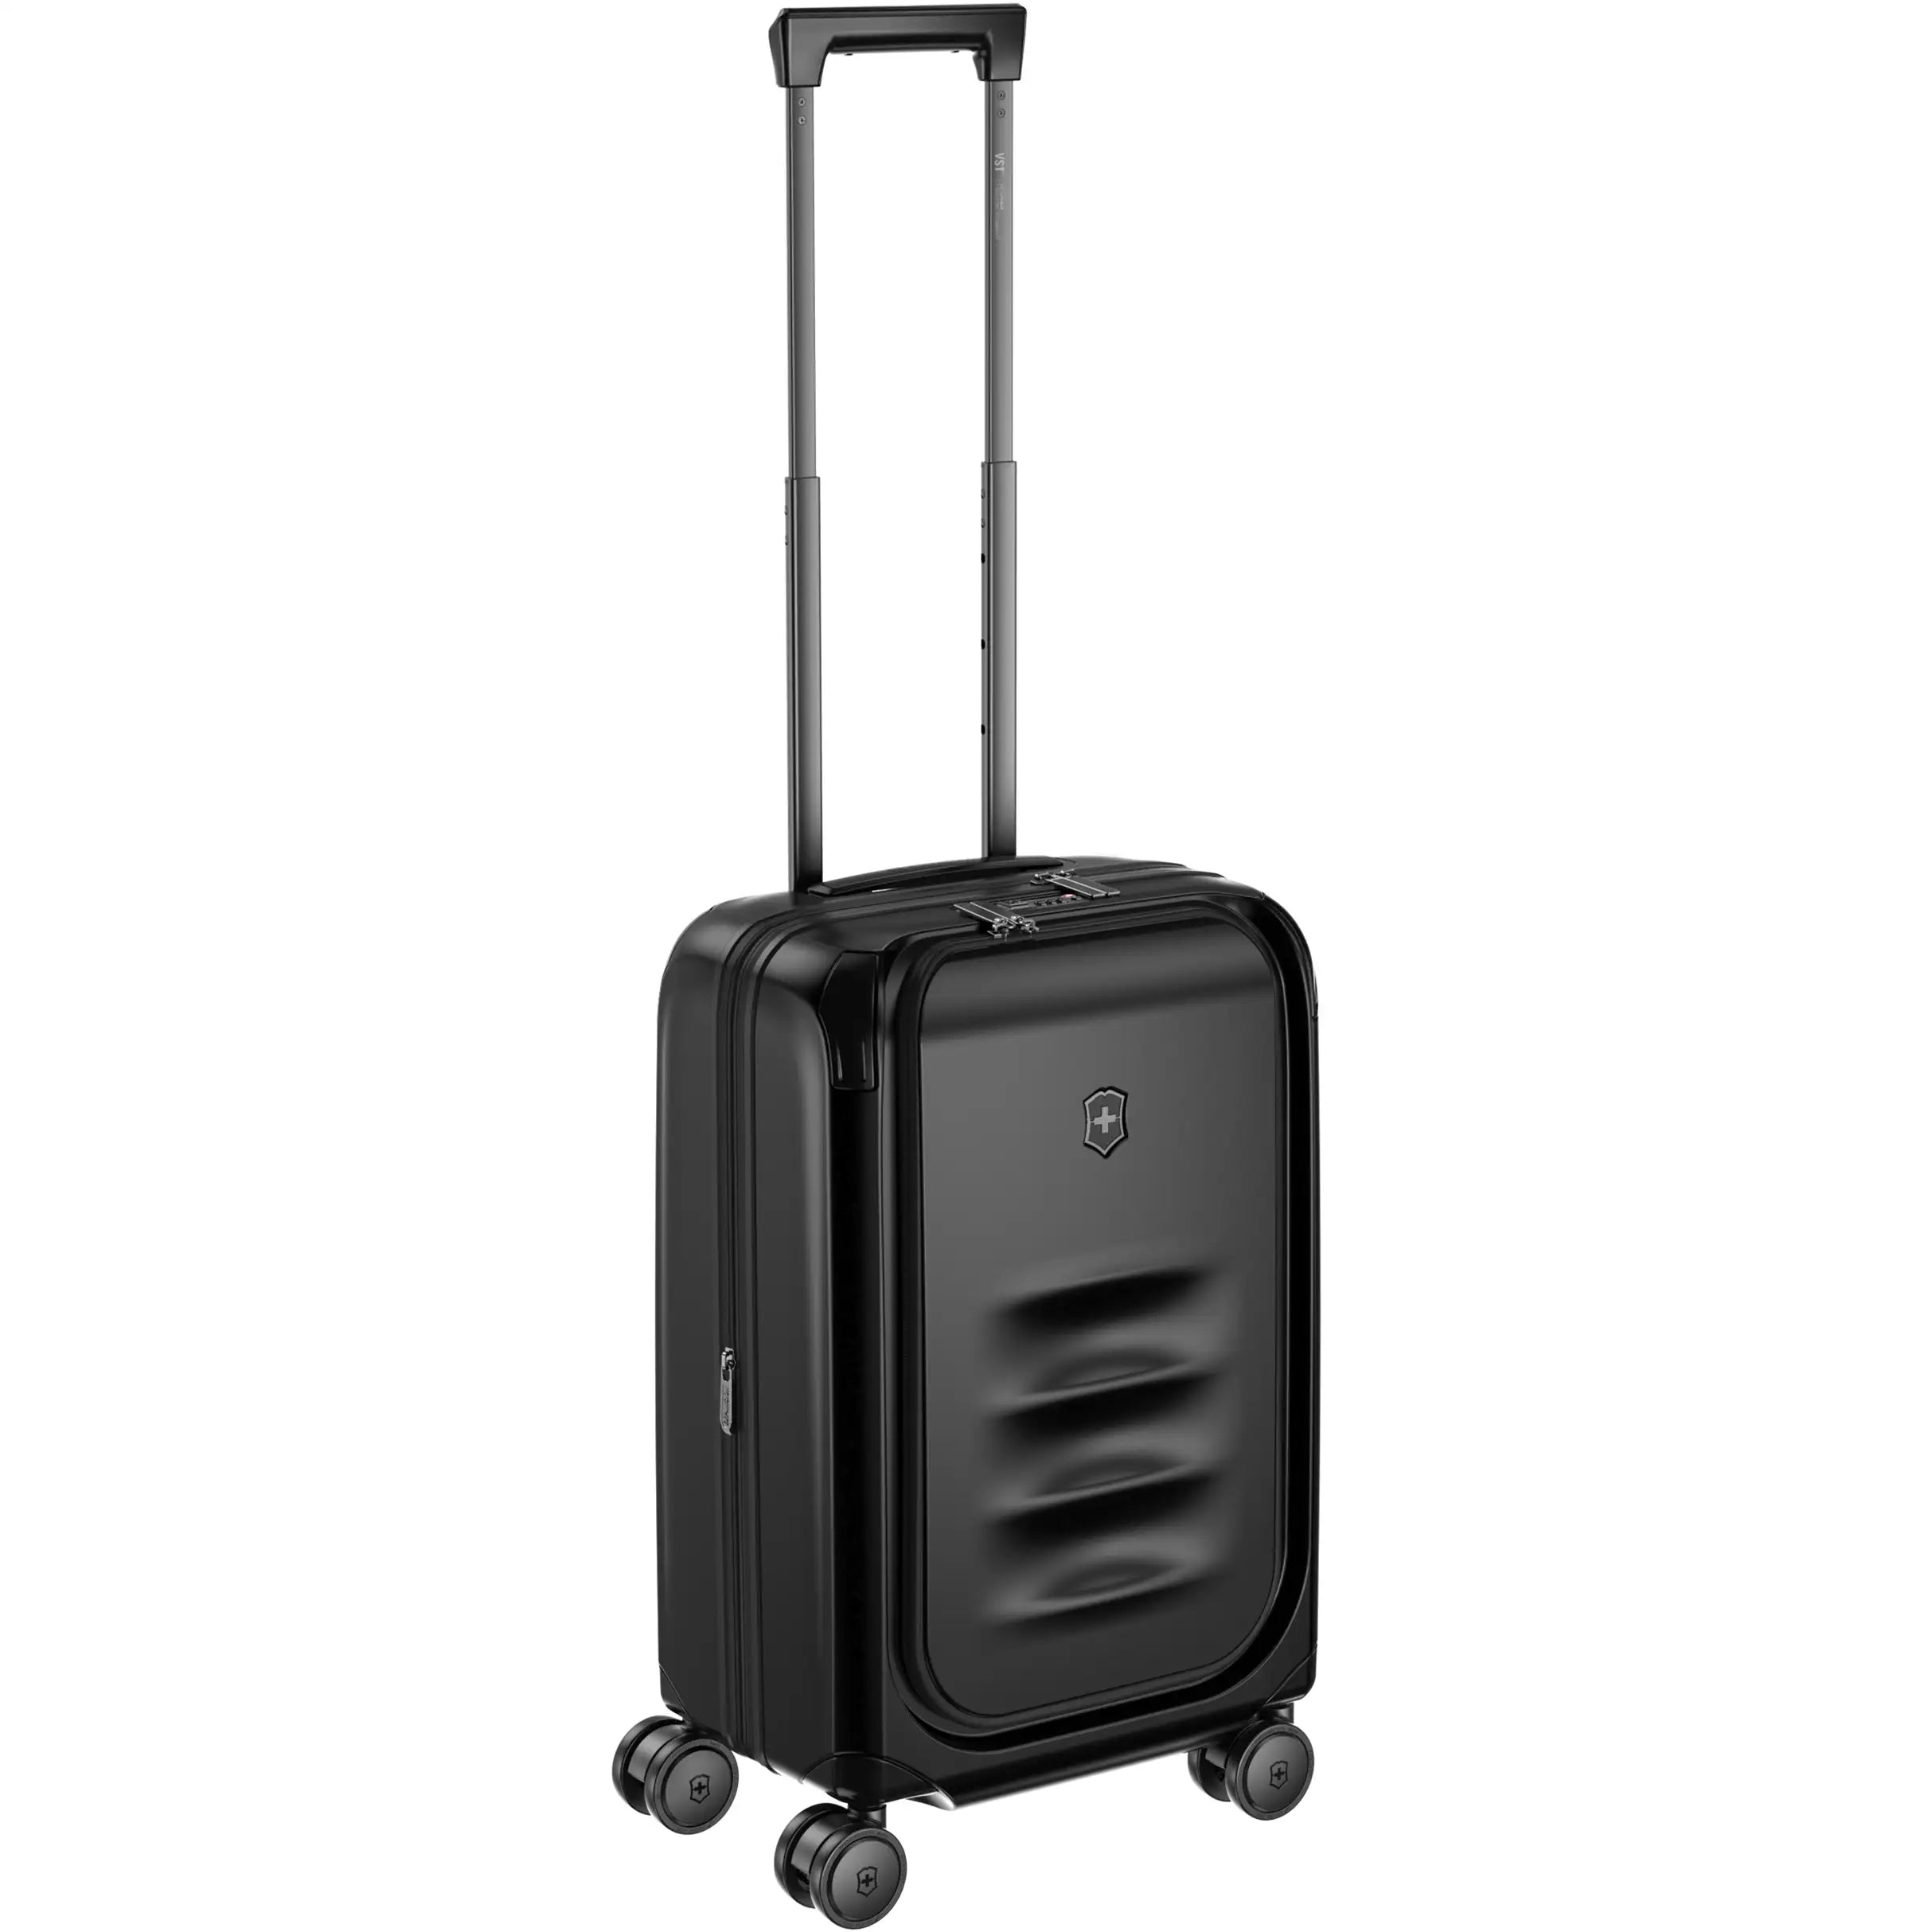 Victorinox Spectra 3.0 Frequent Flyer Carry-On 55 cm - Black